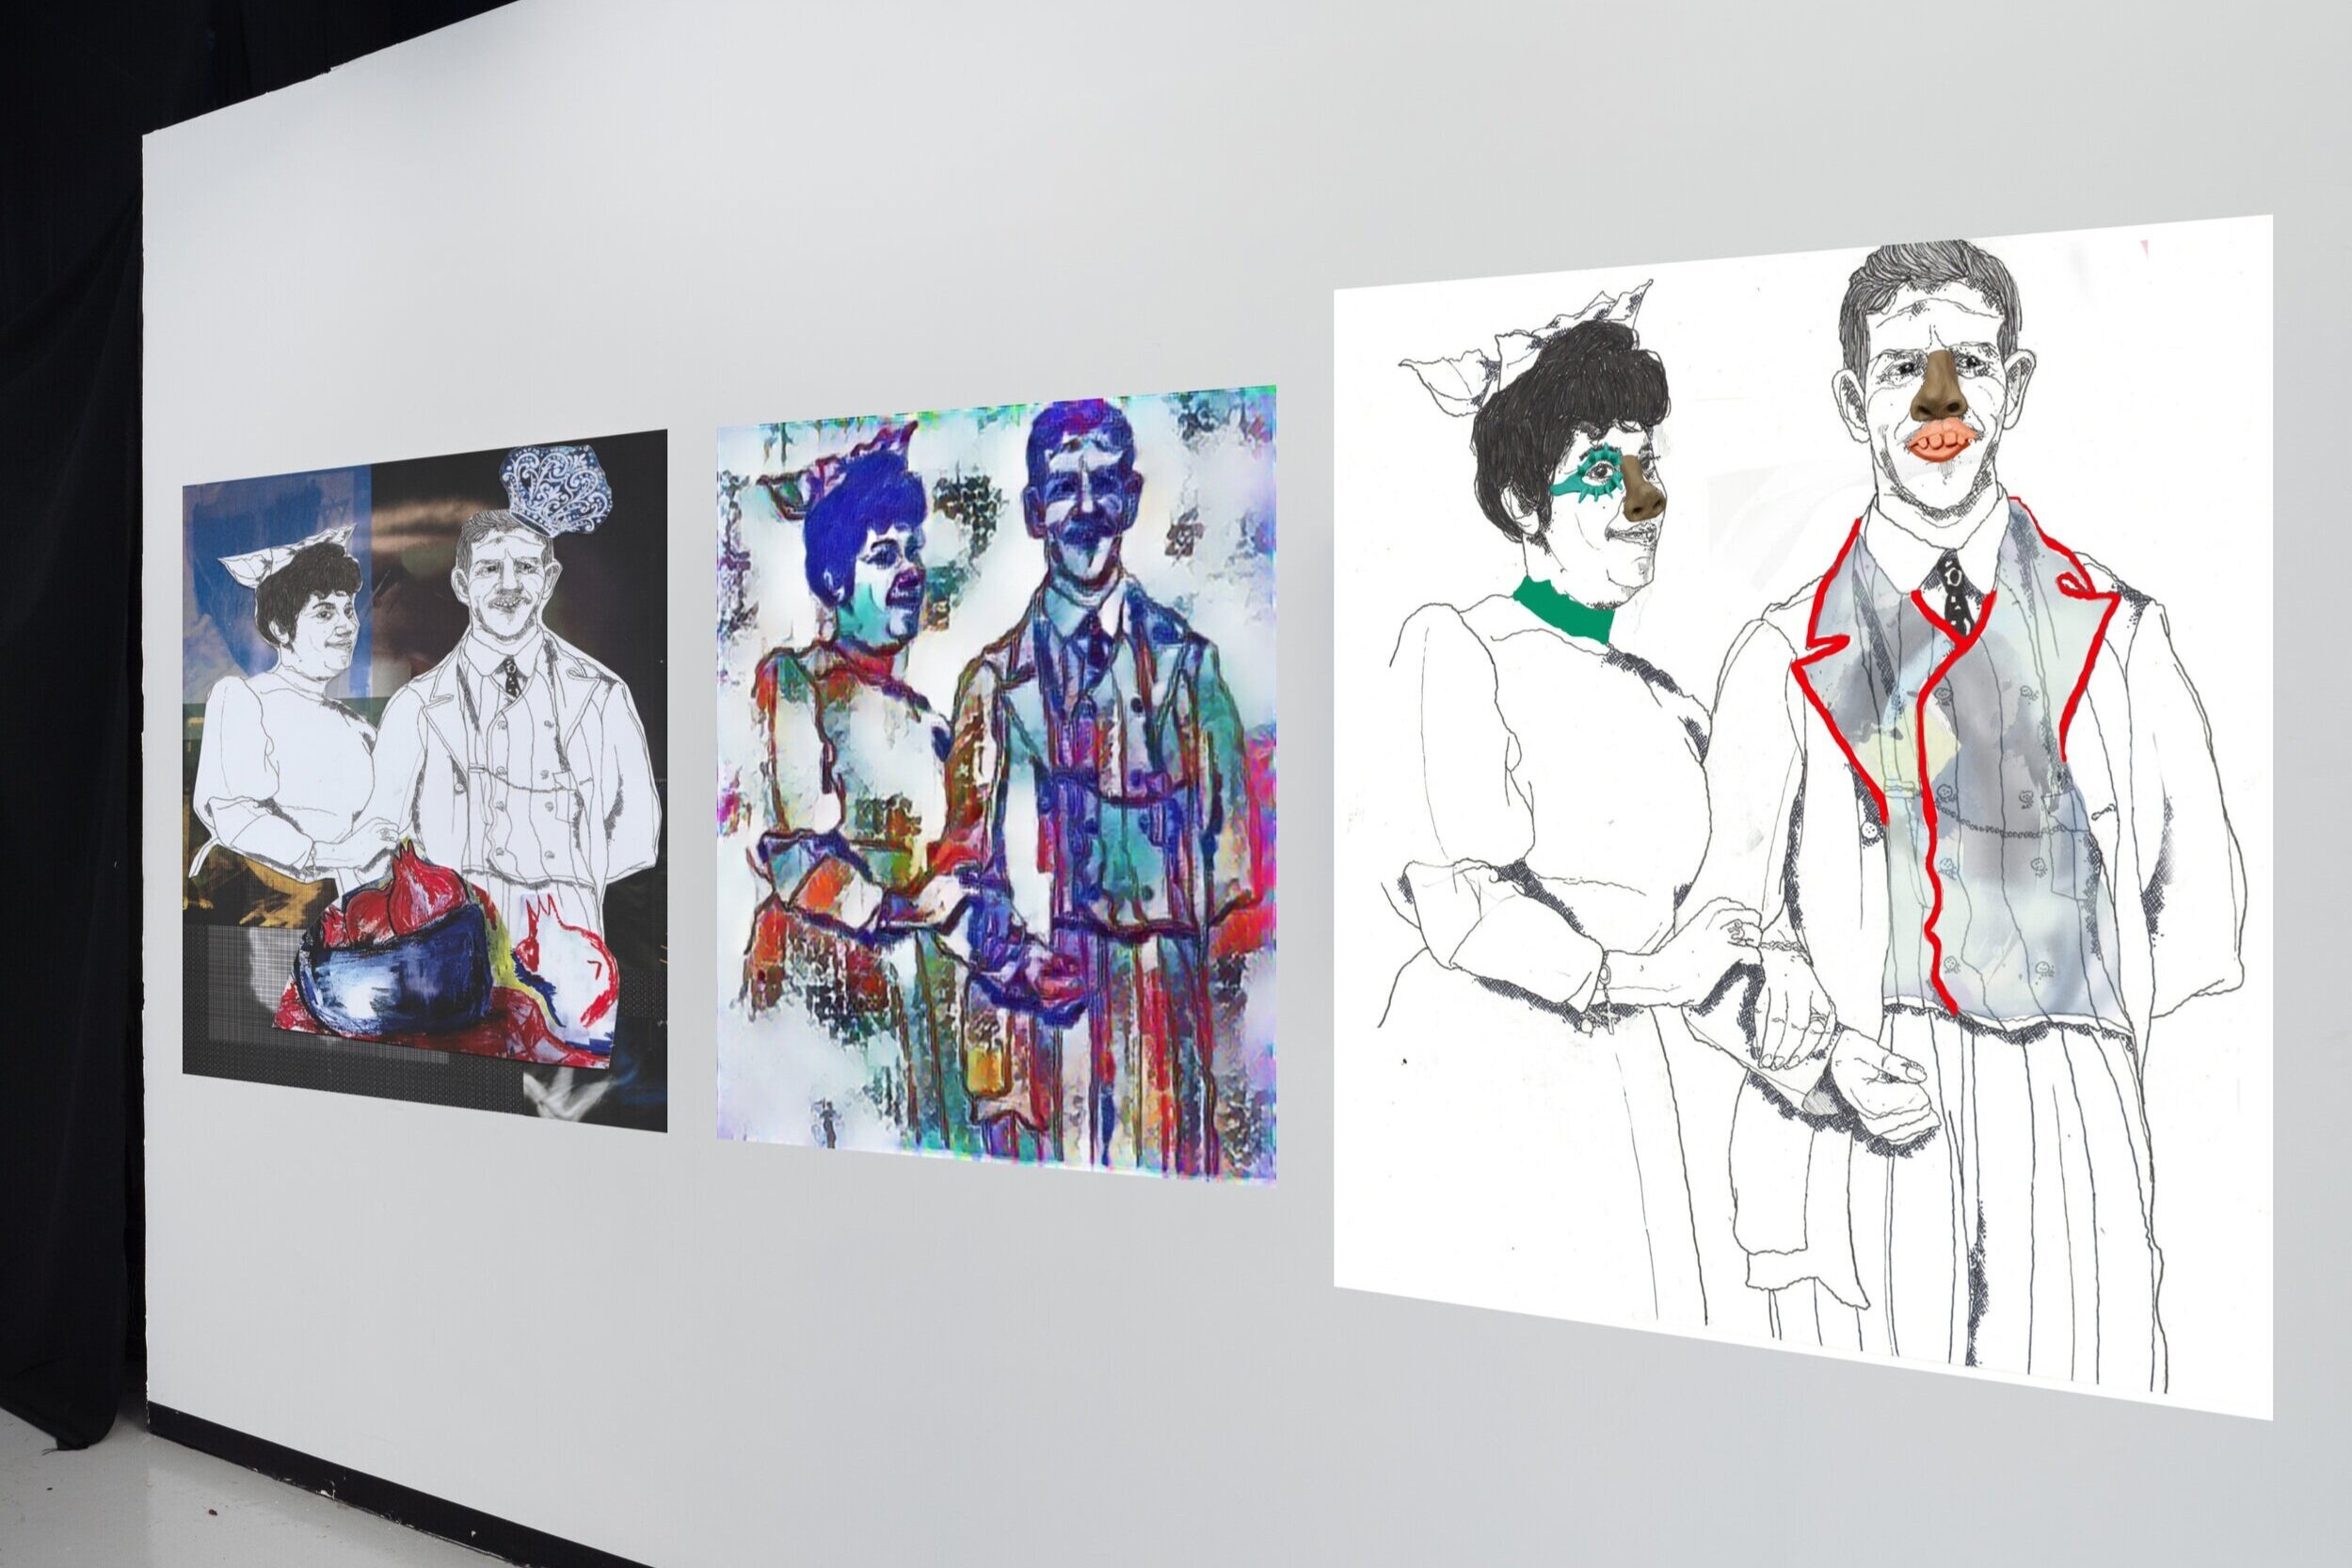  Digital edits of the artworks at Sydney Art Collective gallery space 